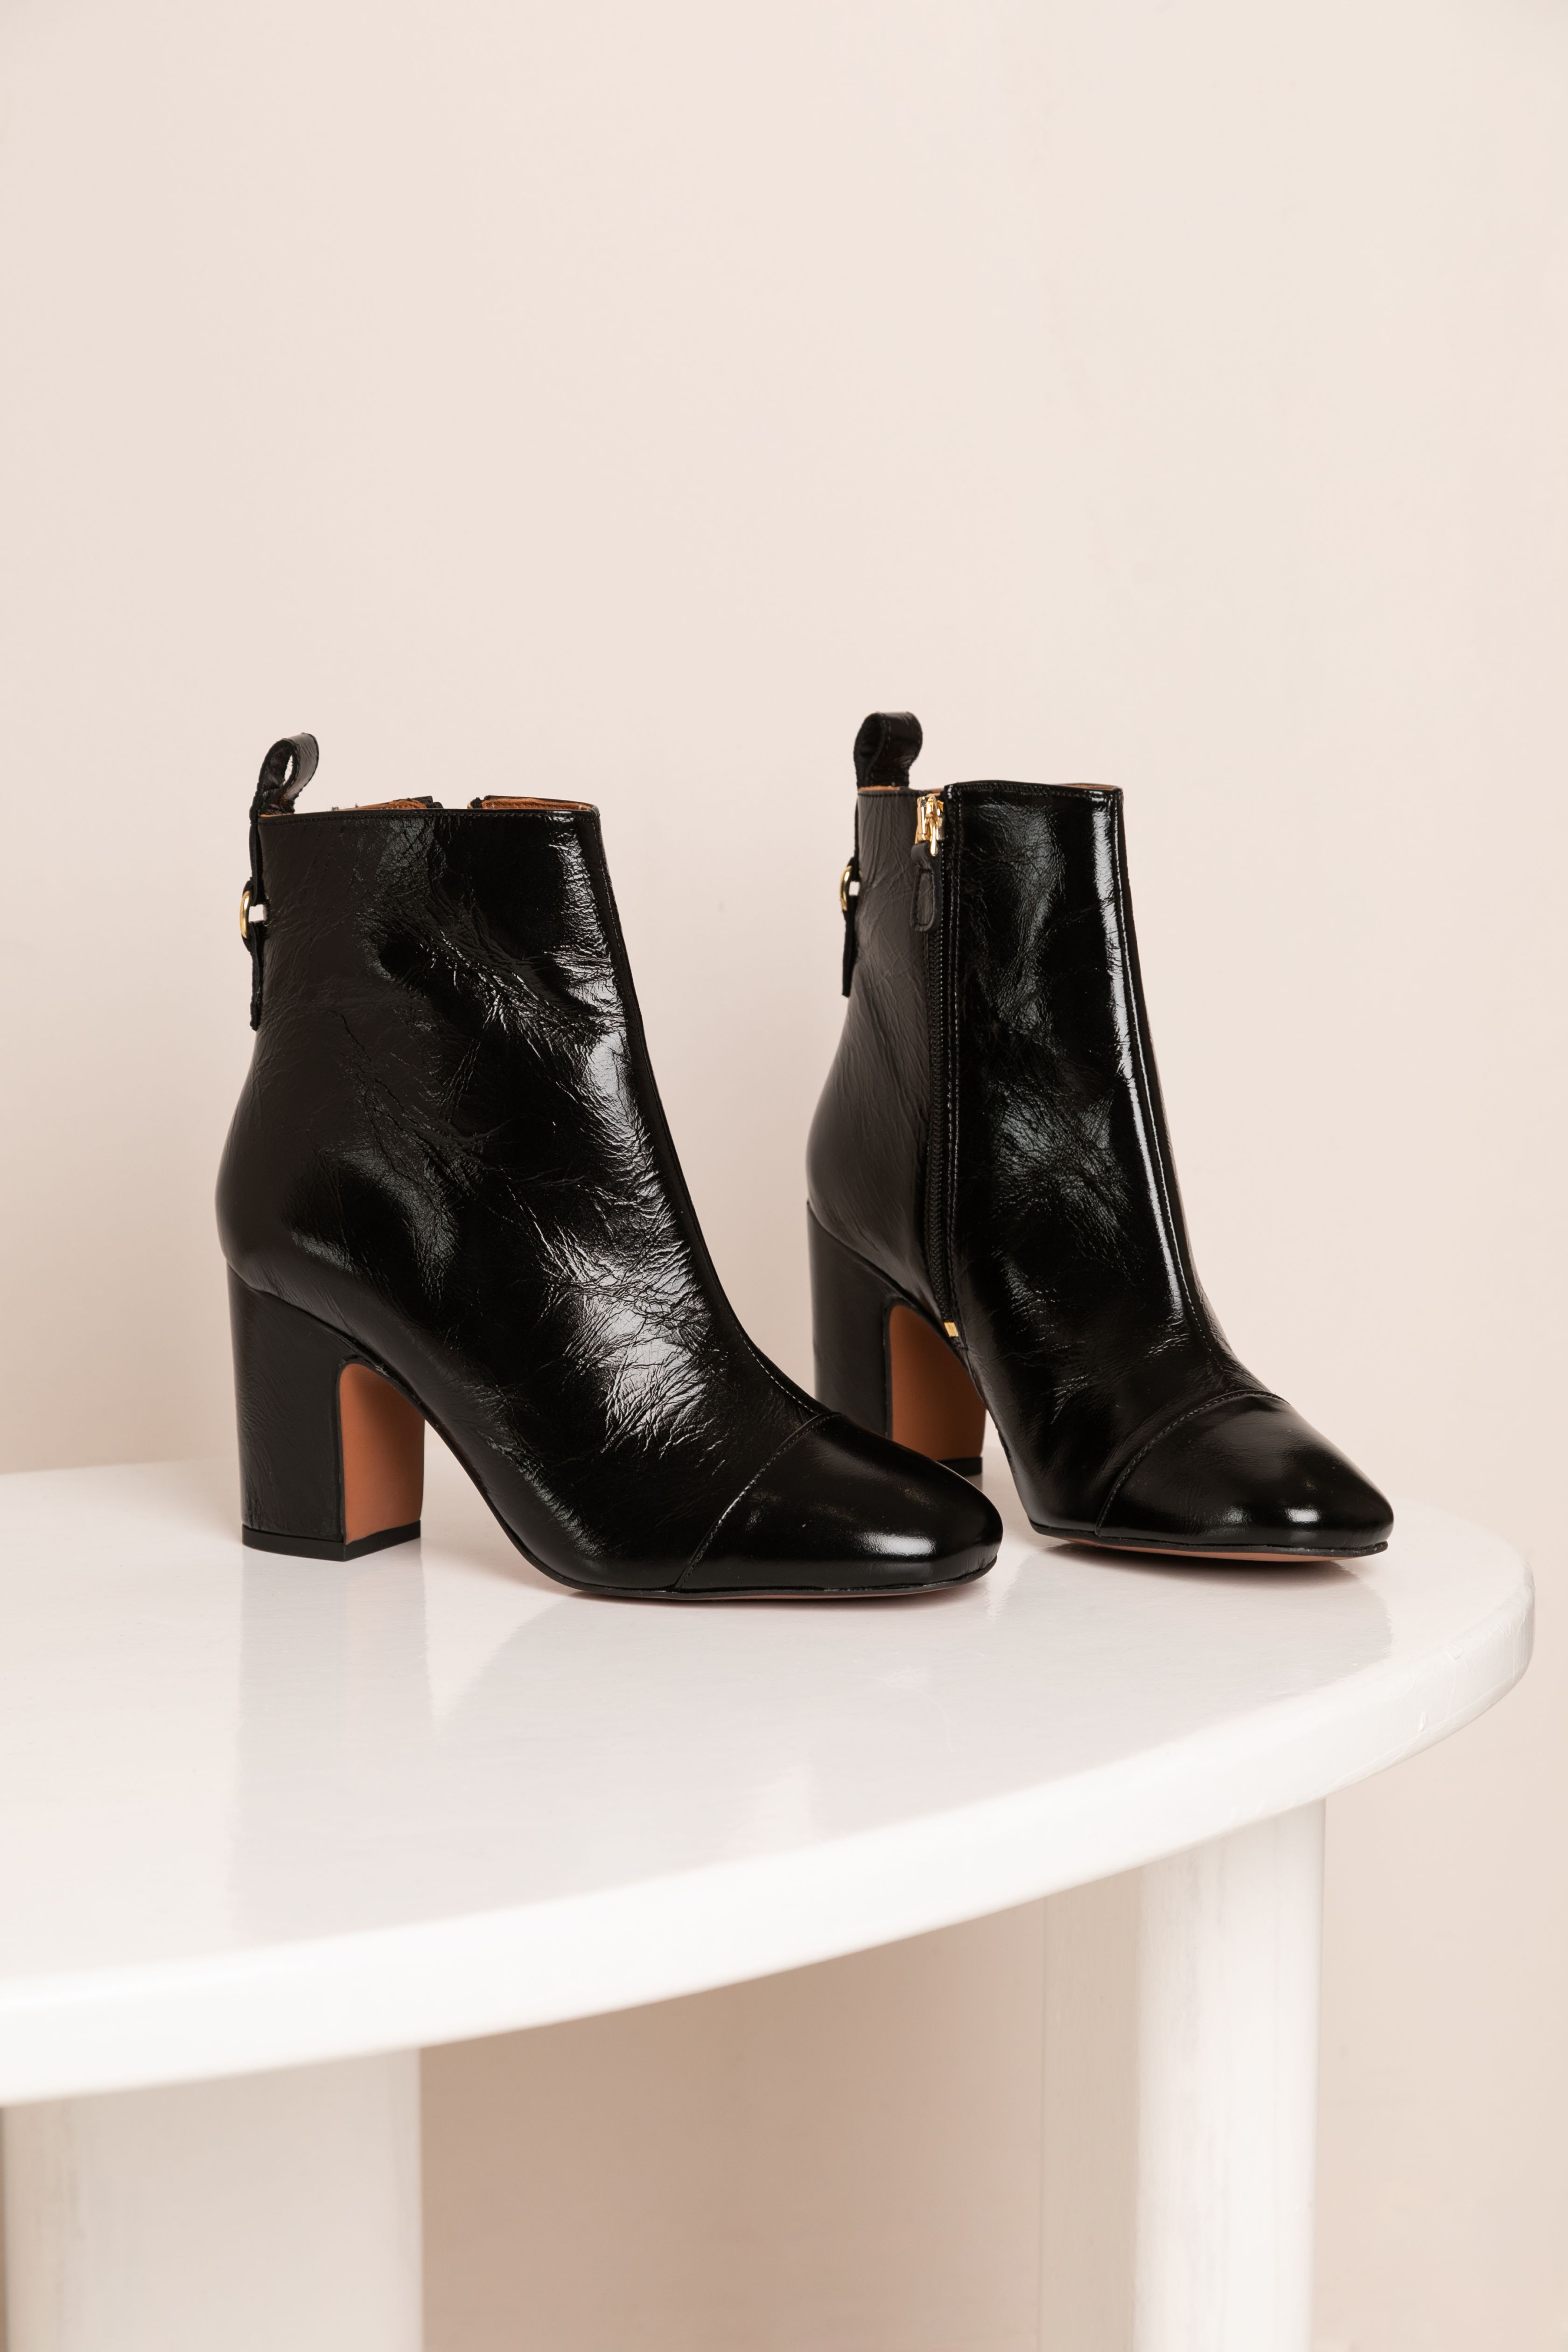 Yesmine ankle boot - Maison Toufet